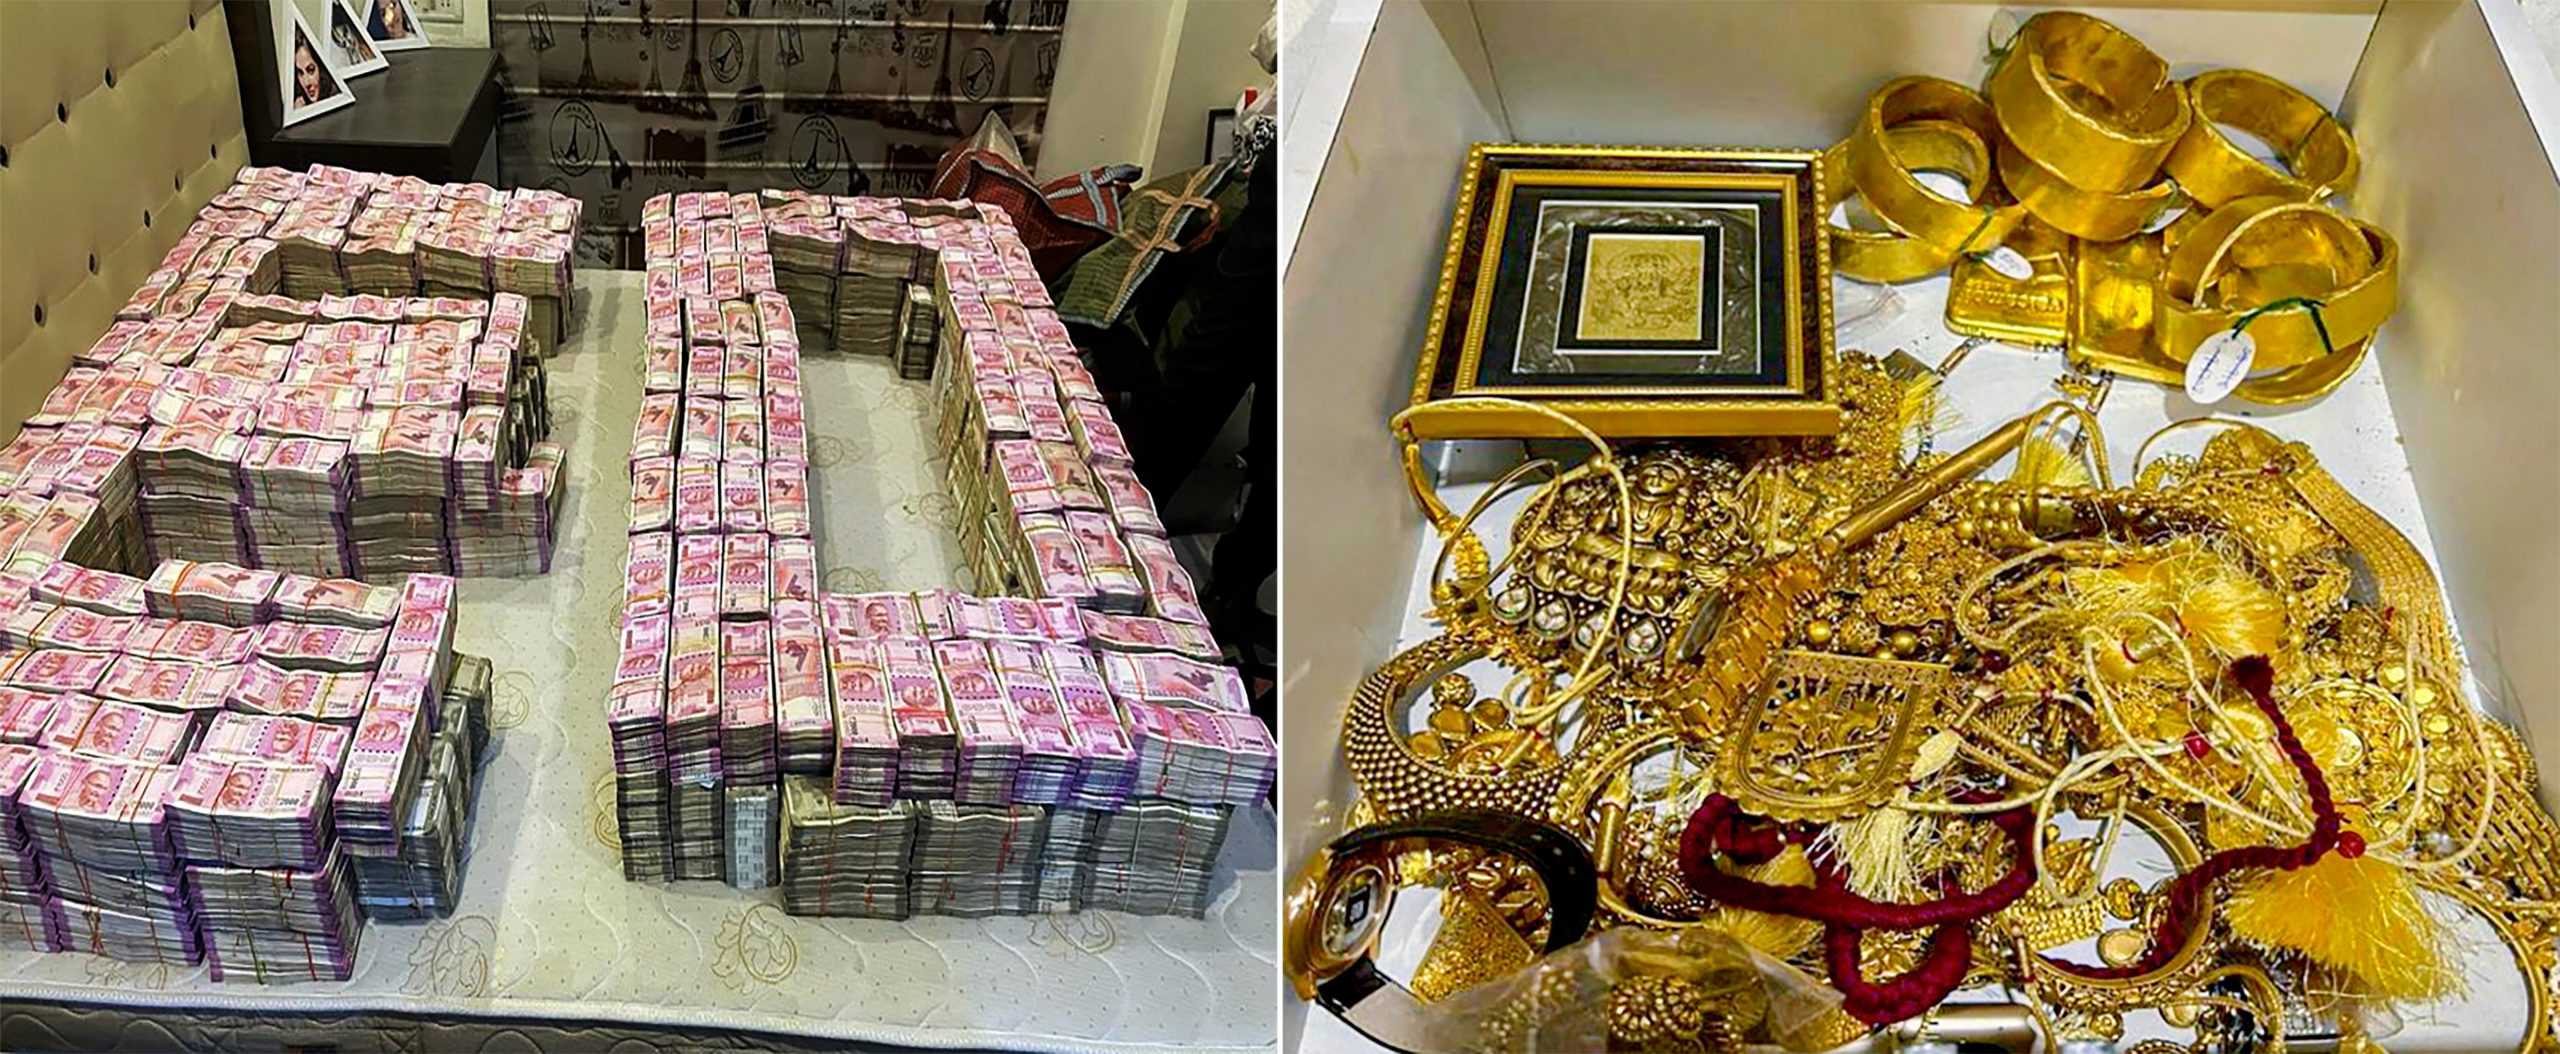 Cash, gold, dollars and more: A look at Partha Chatterjee and Arpita Mukherjee’s loot